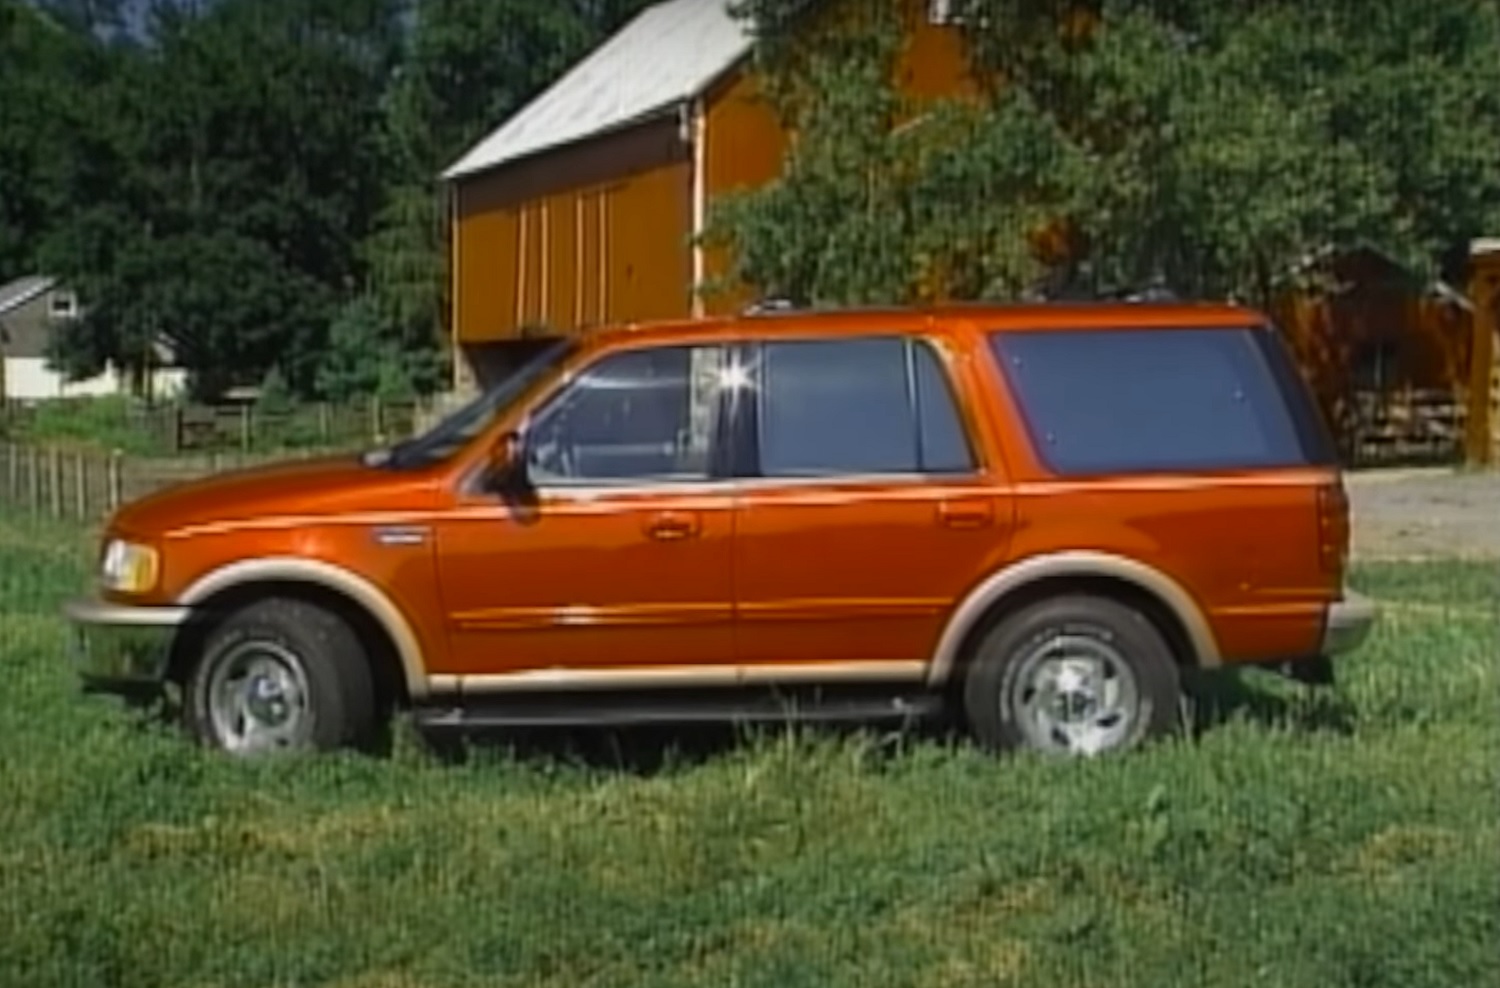 1997 Ford Expedition Review Praised SUV For 'Car Like' Handling: Video